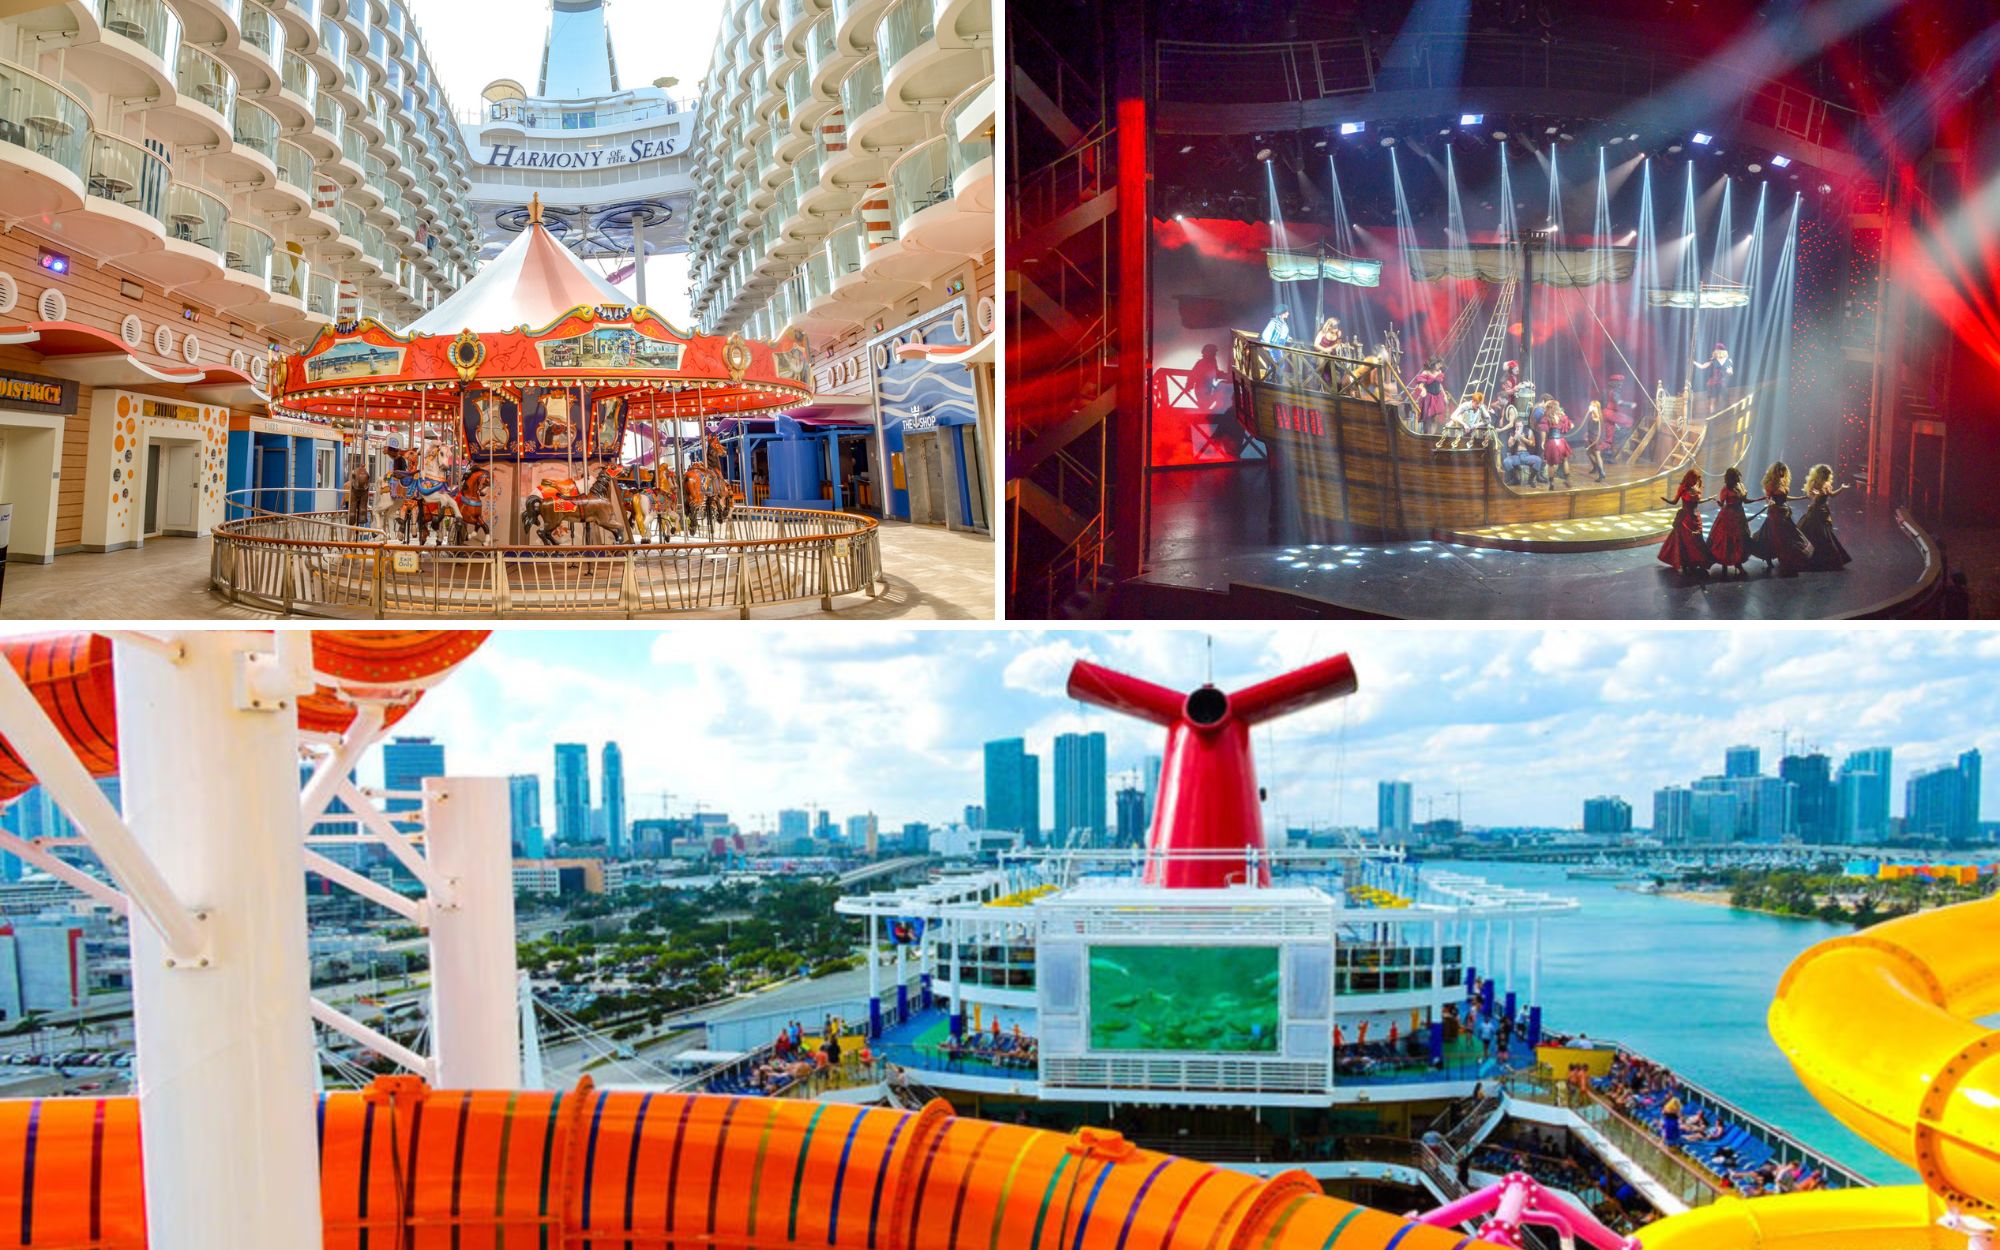 Carousel on Harmony of the seas, theater, and pool deck with waterslides on Carnival Horizon